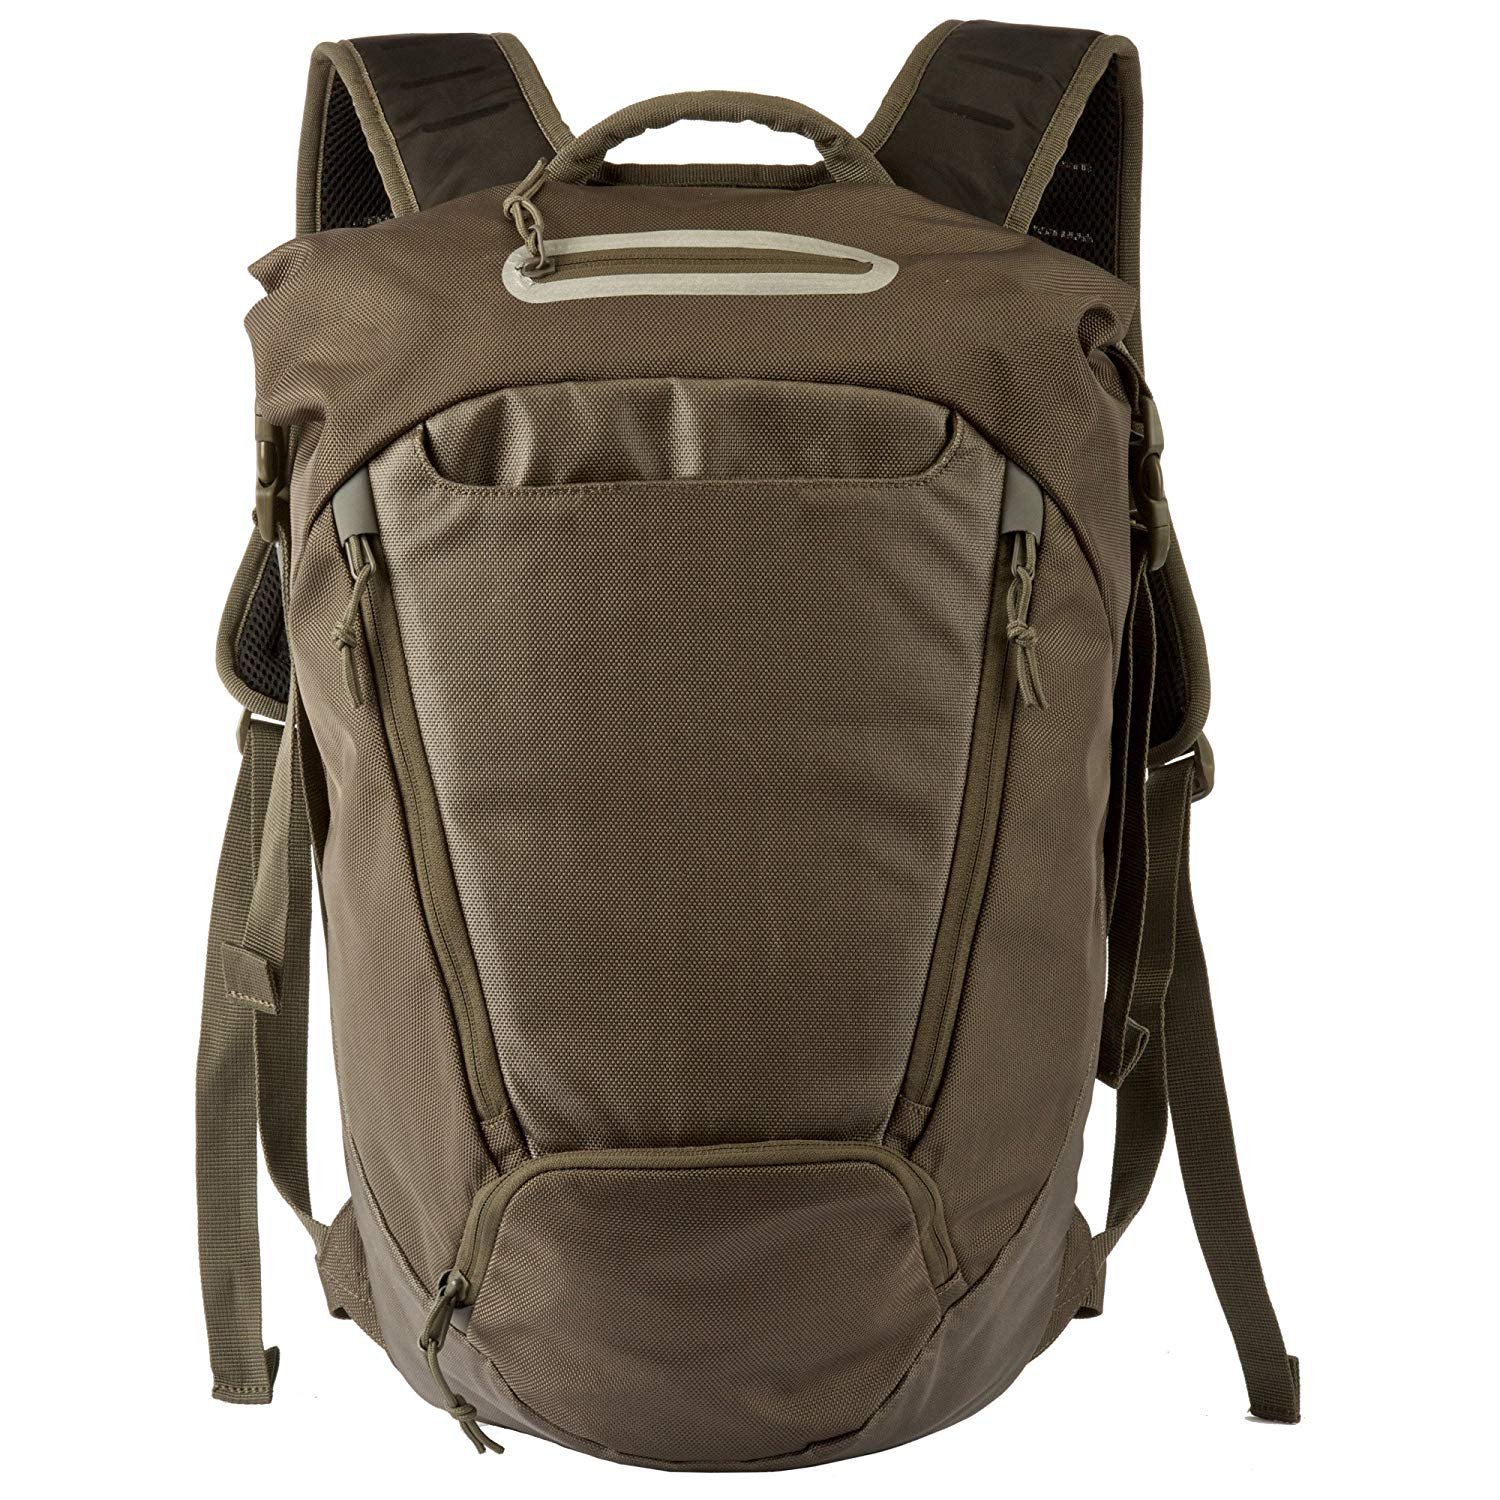 5.11 Tactical LV Covert Carry Pack 45L in Black